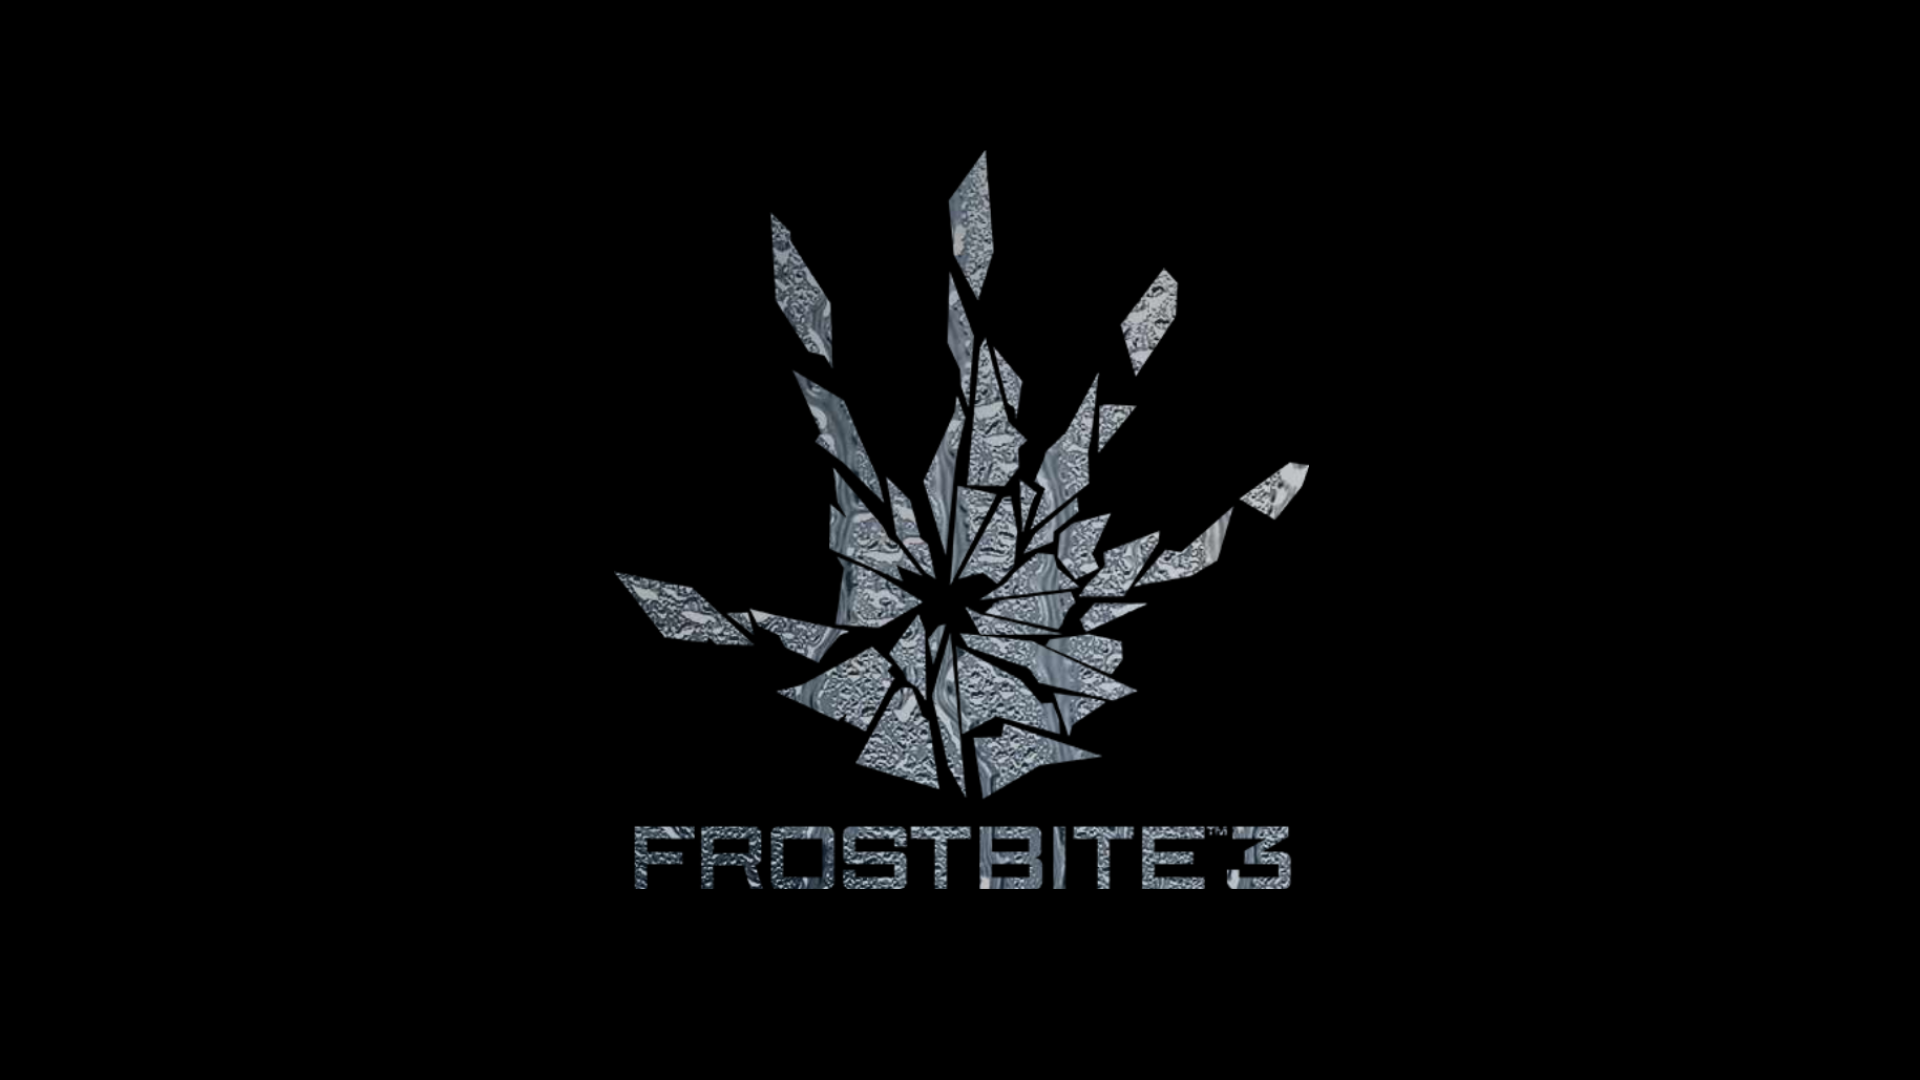 Frostbite HD Wallpaper Background Image